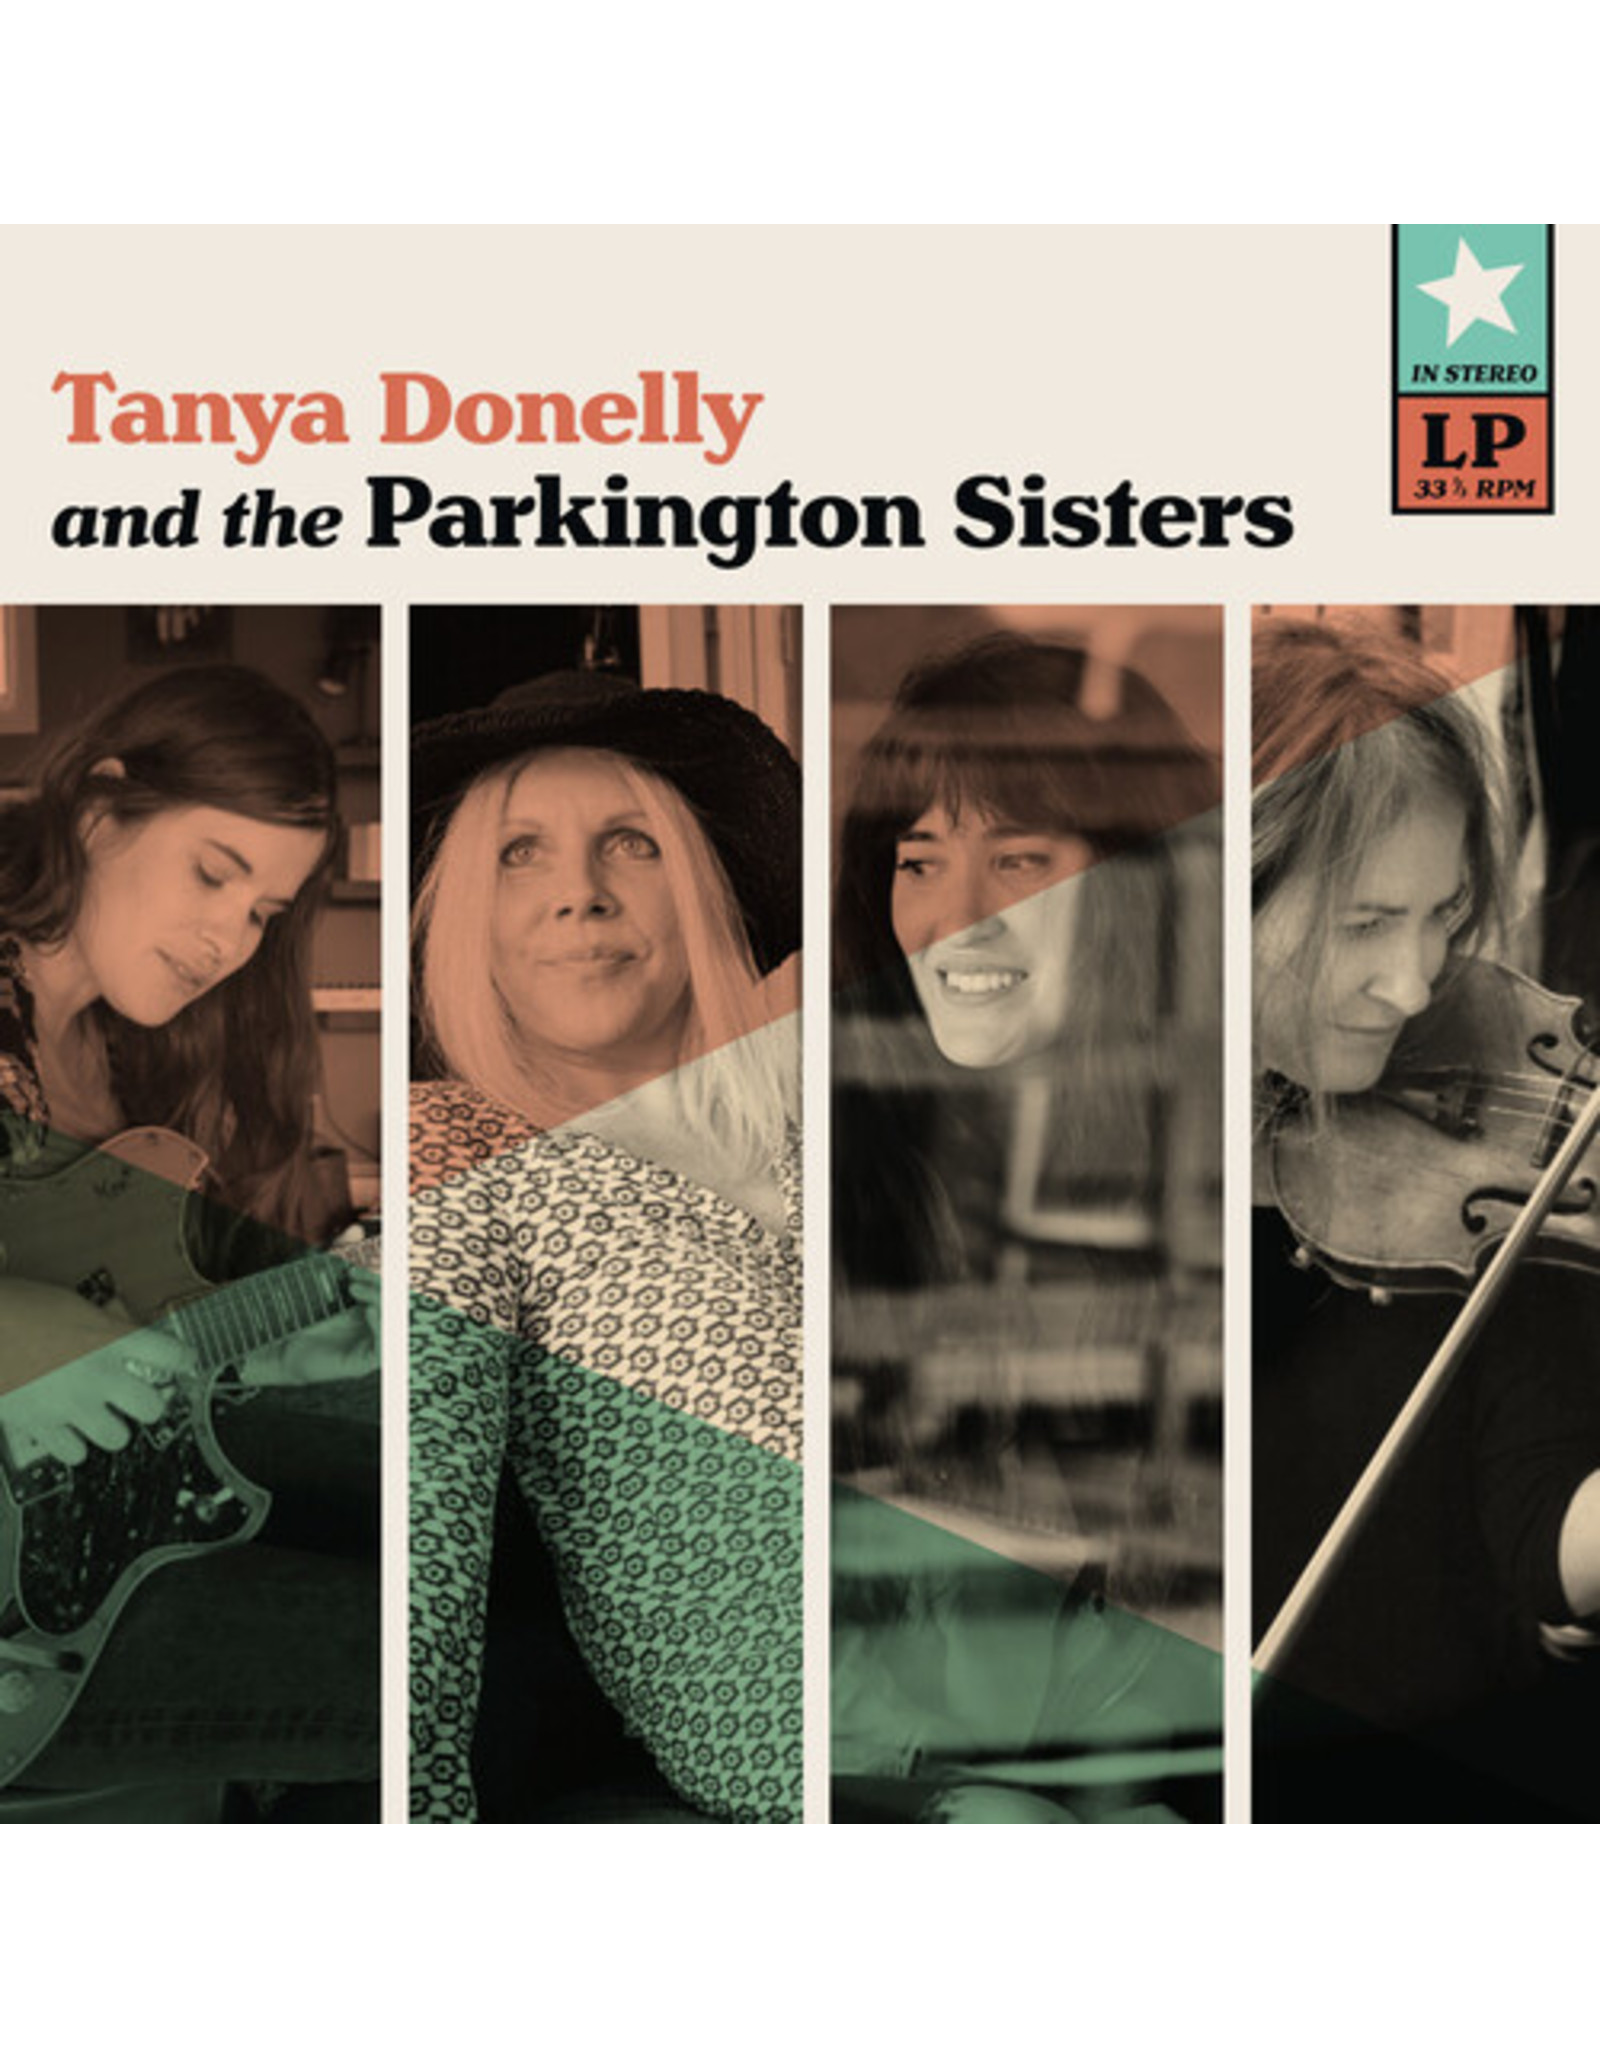 New Vinyl Tanya Donelly & the Parkington Sisters - S/T (Colored) LP